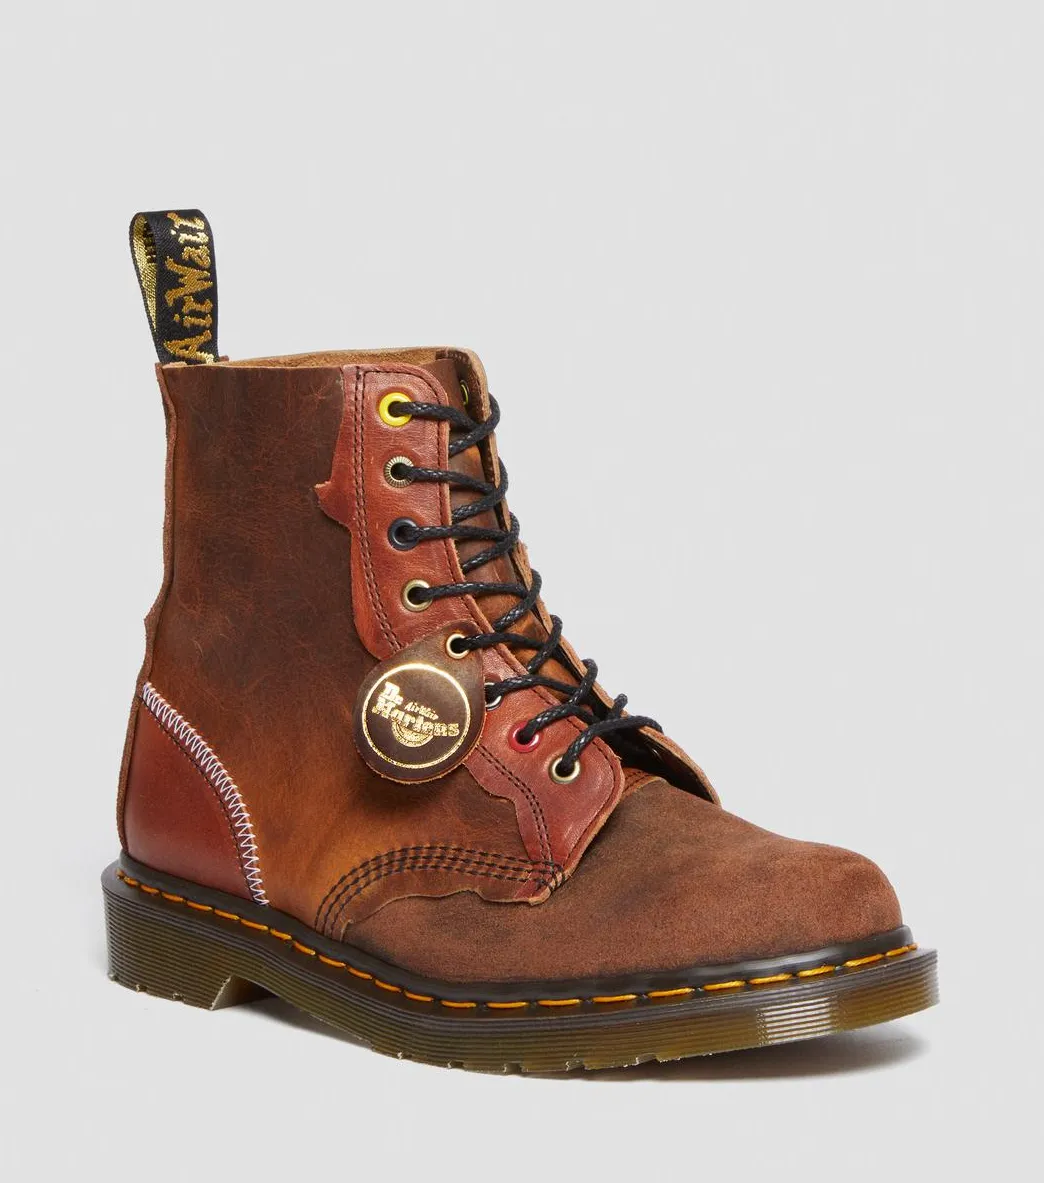 Dr. Martens, Made in England Deadstock, 1460. £239.00